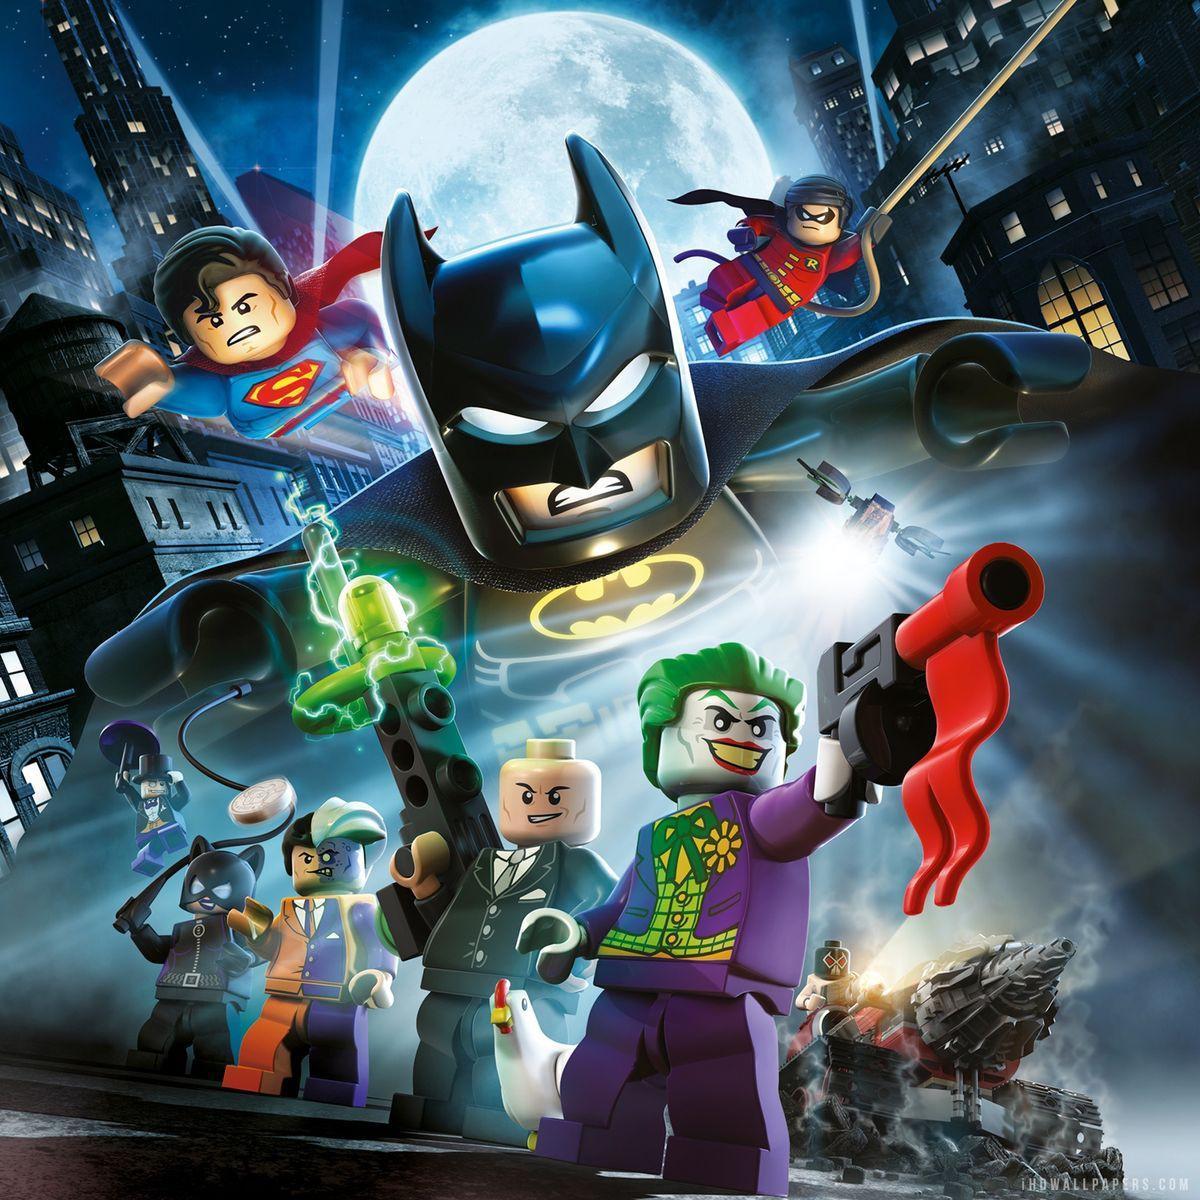 Lego Movie Wallpaper Ultimate Collection for Android - APK Download